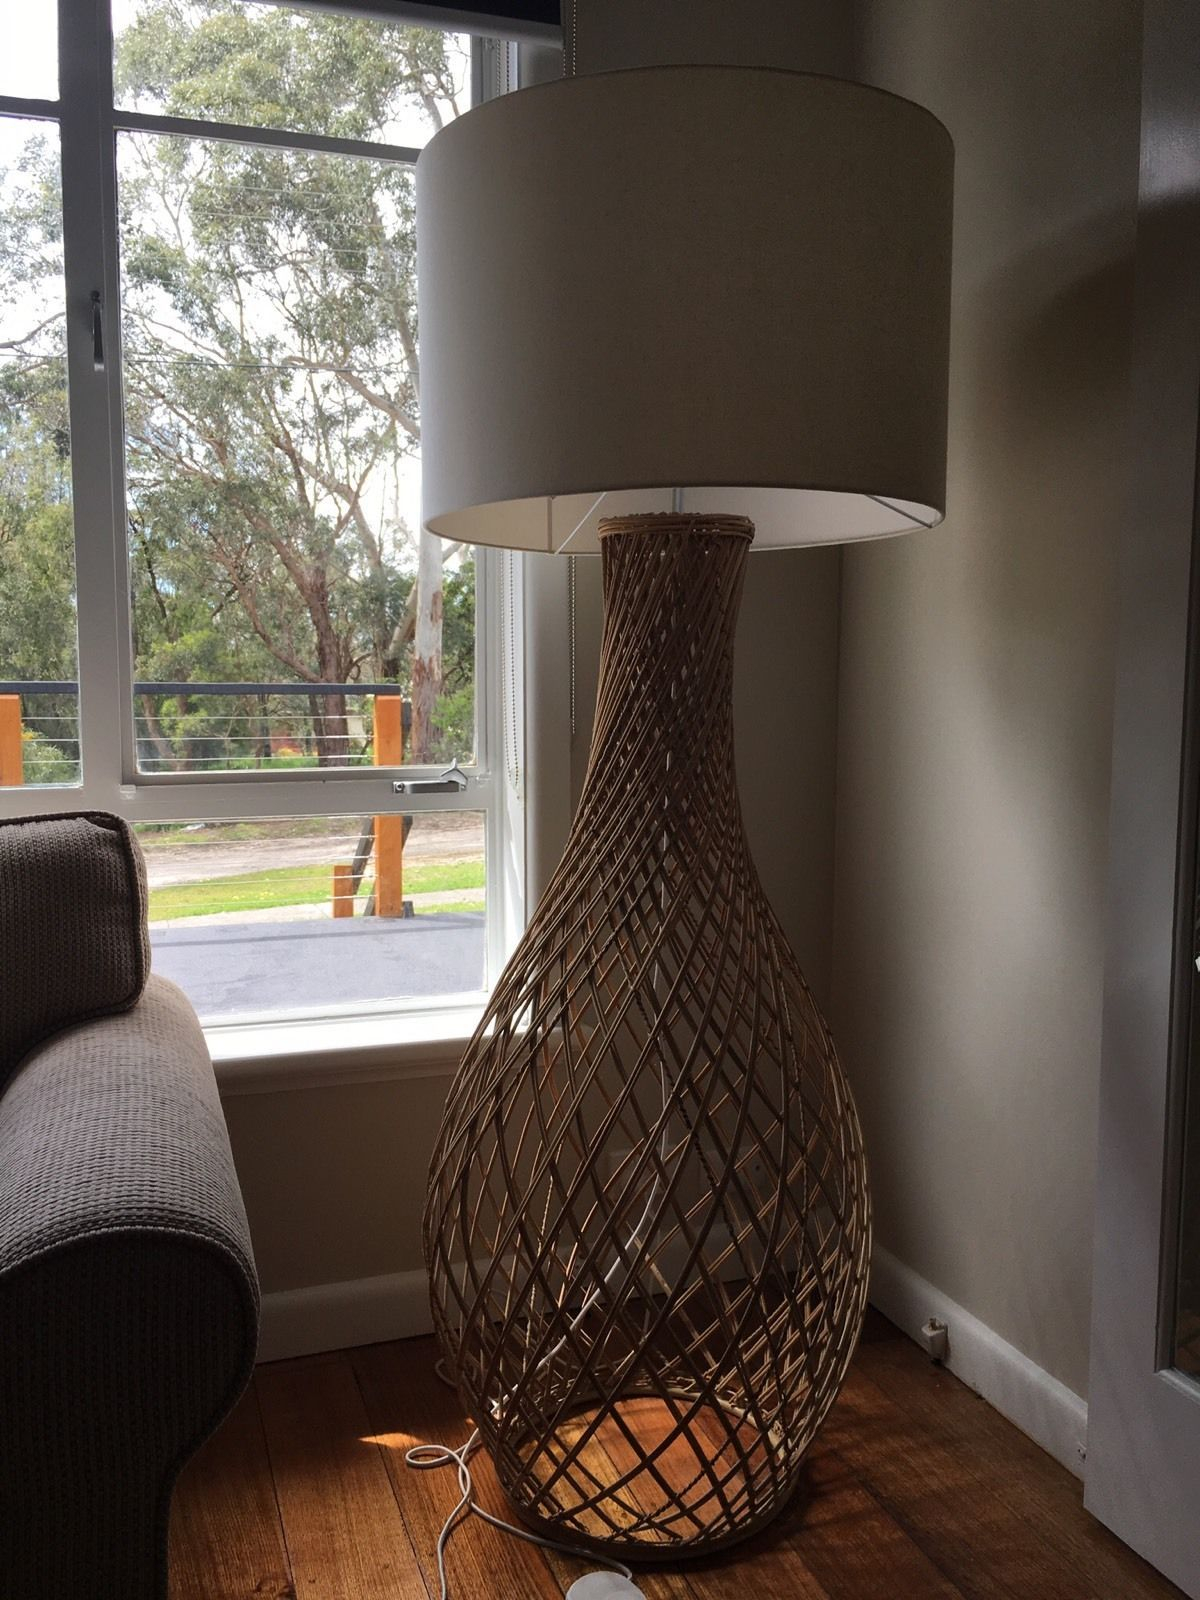 Twine Wicker Floor Lamp Beige Fleck Lampshade Excellent with size 1200 X 1600